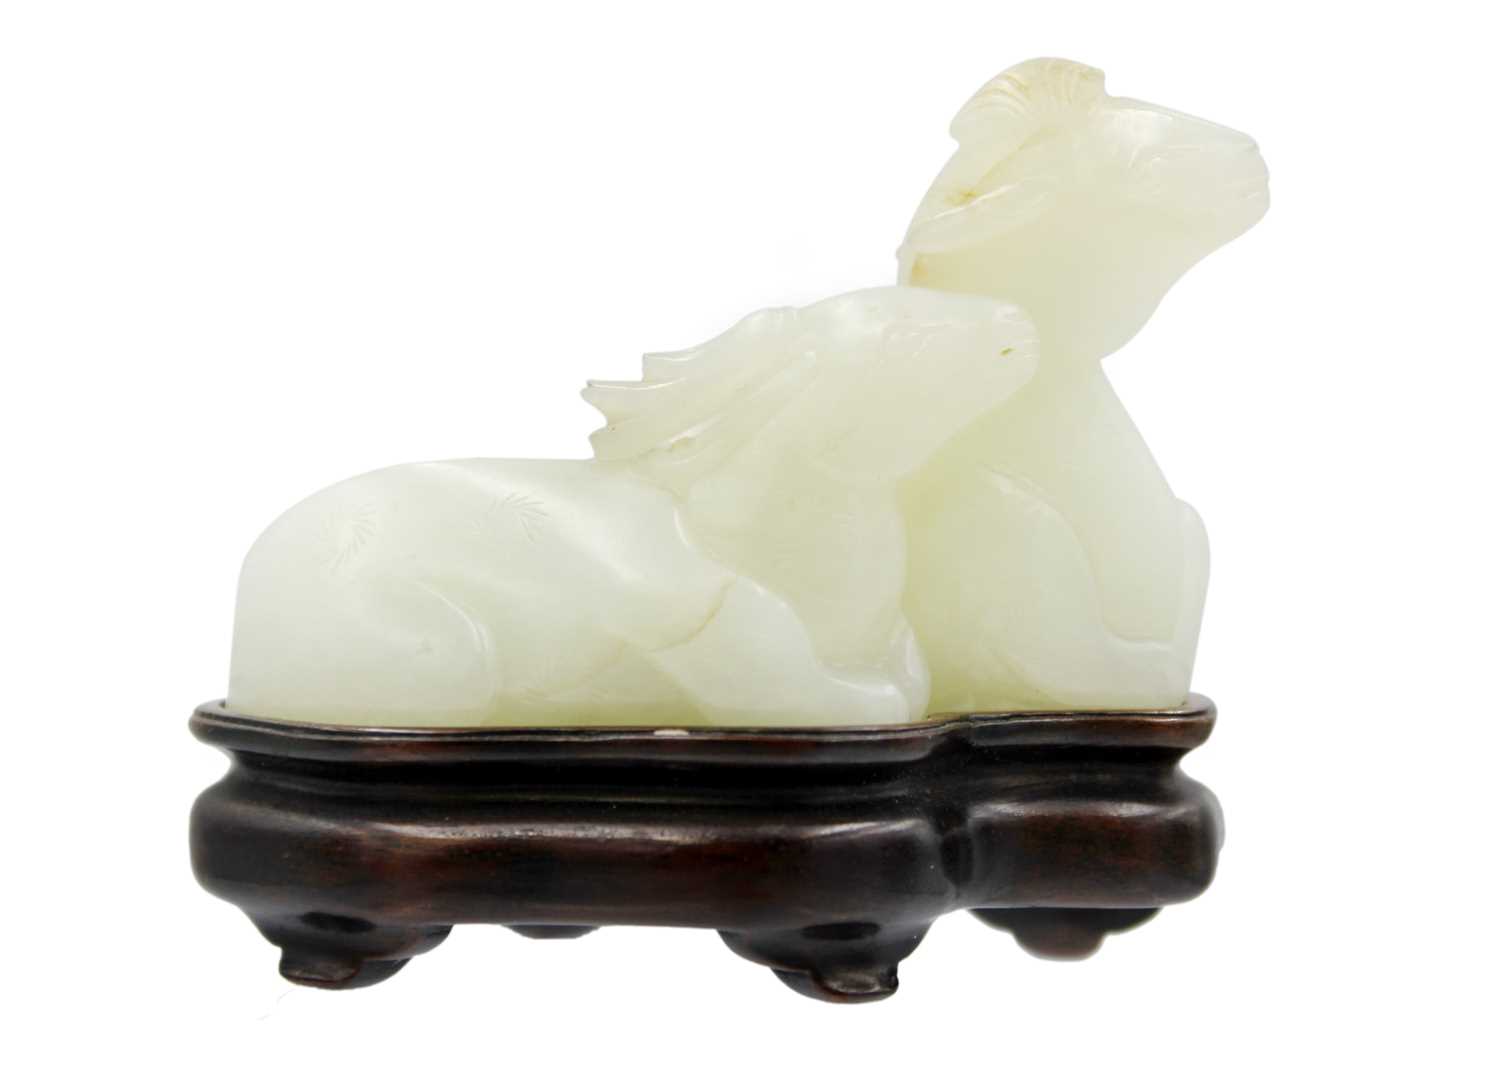 A Chinese carved celadon jade group of deers, Qing Dynasty, 19th century.